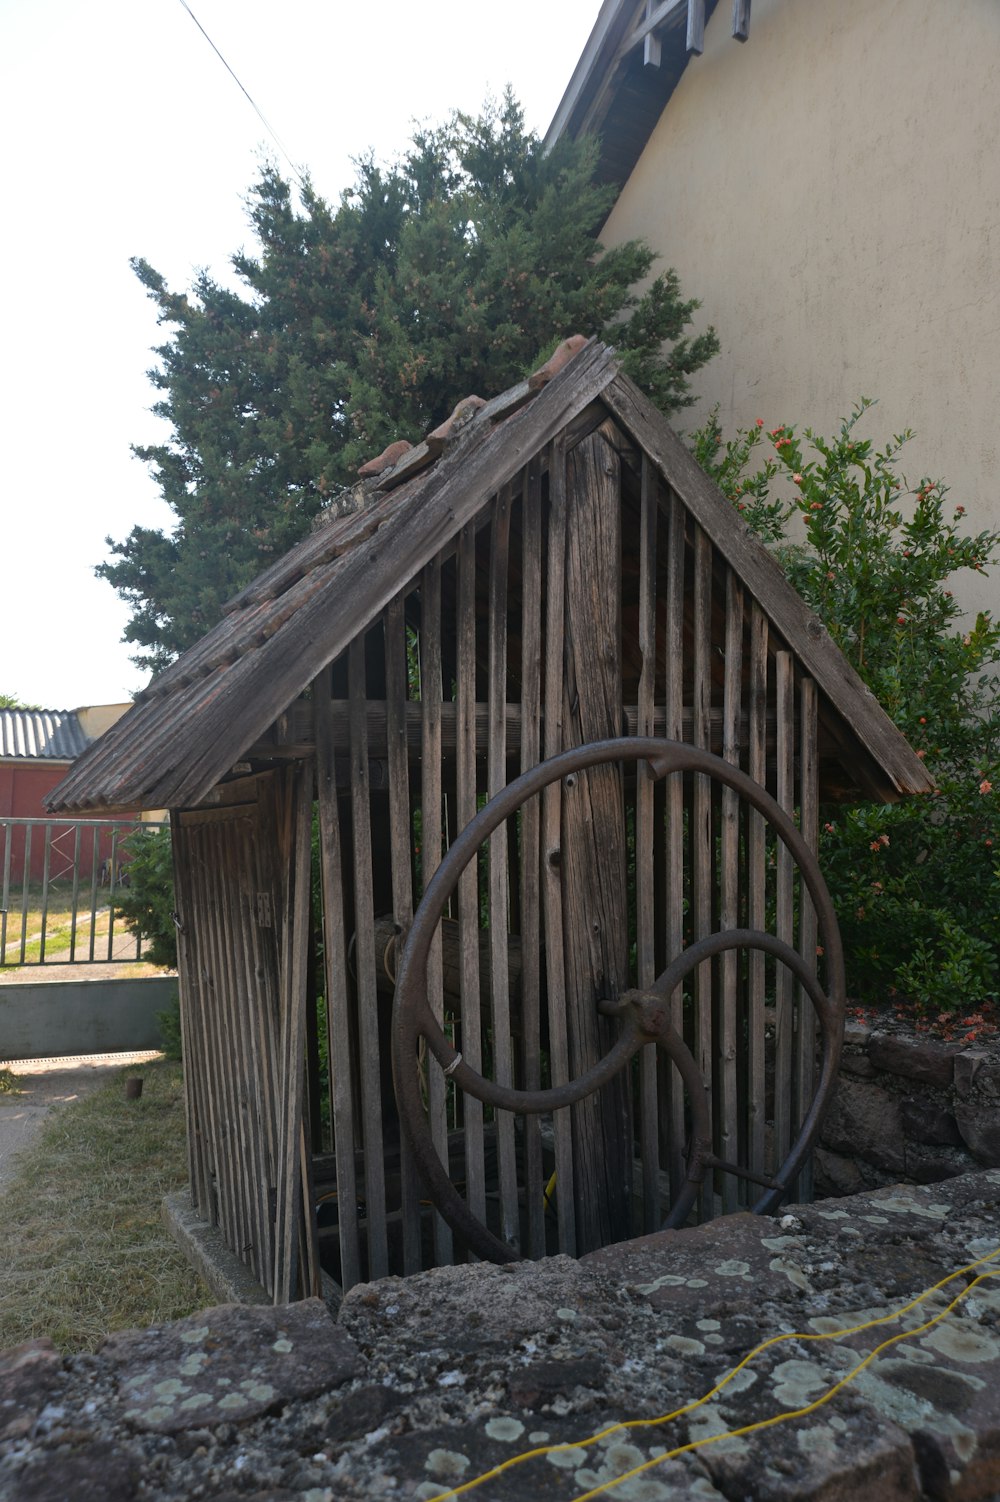 a wooden structure with a wheel attached to it